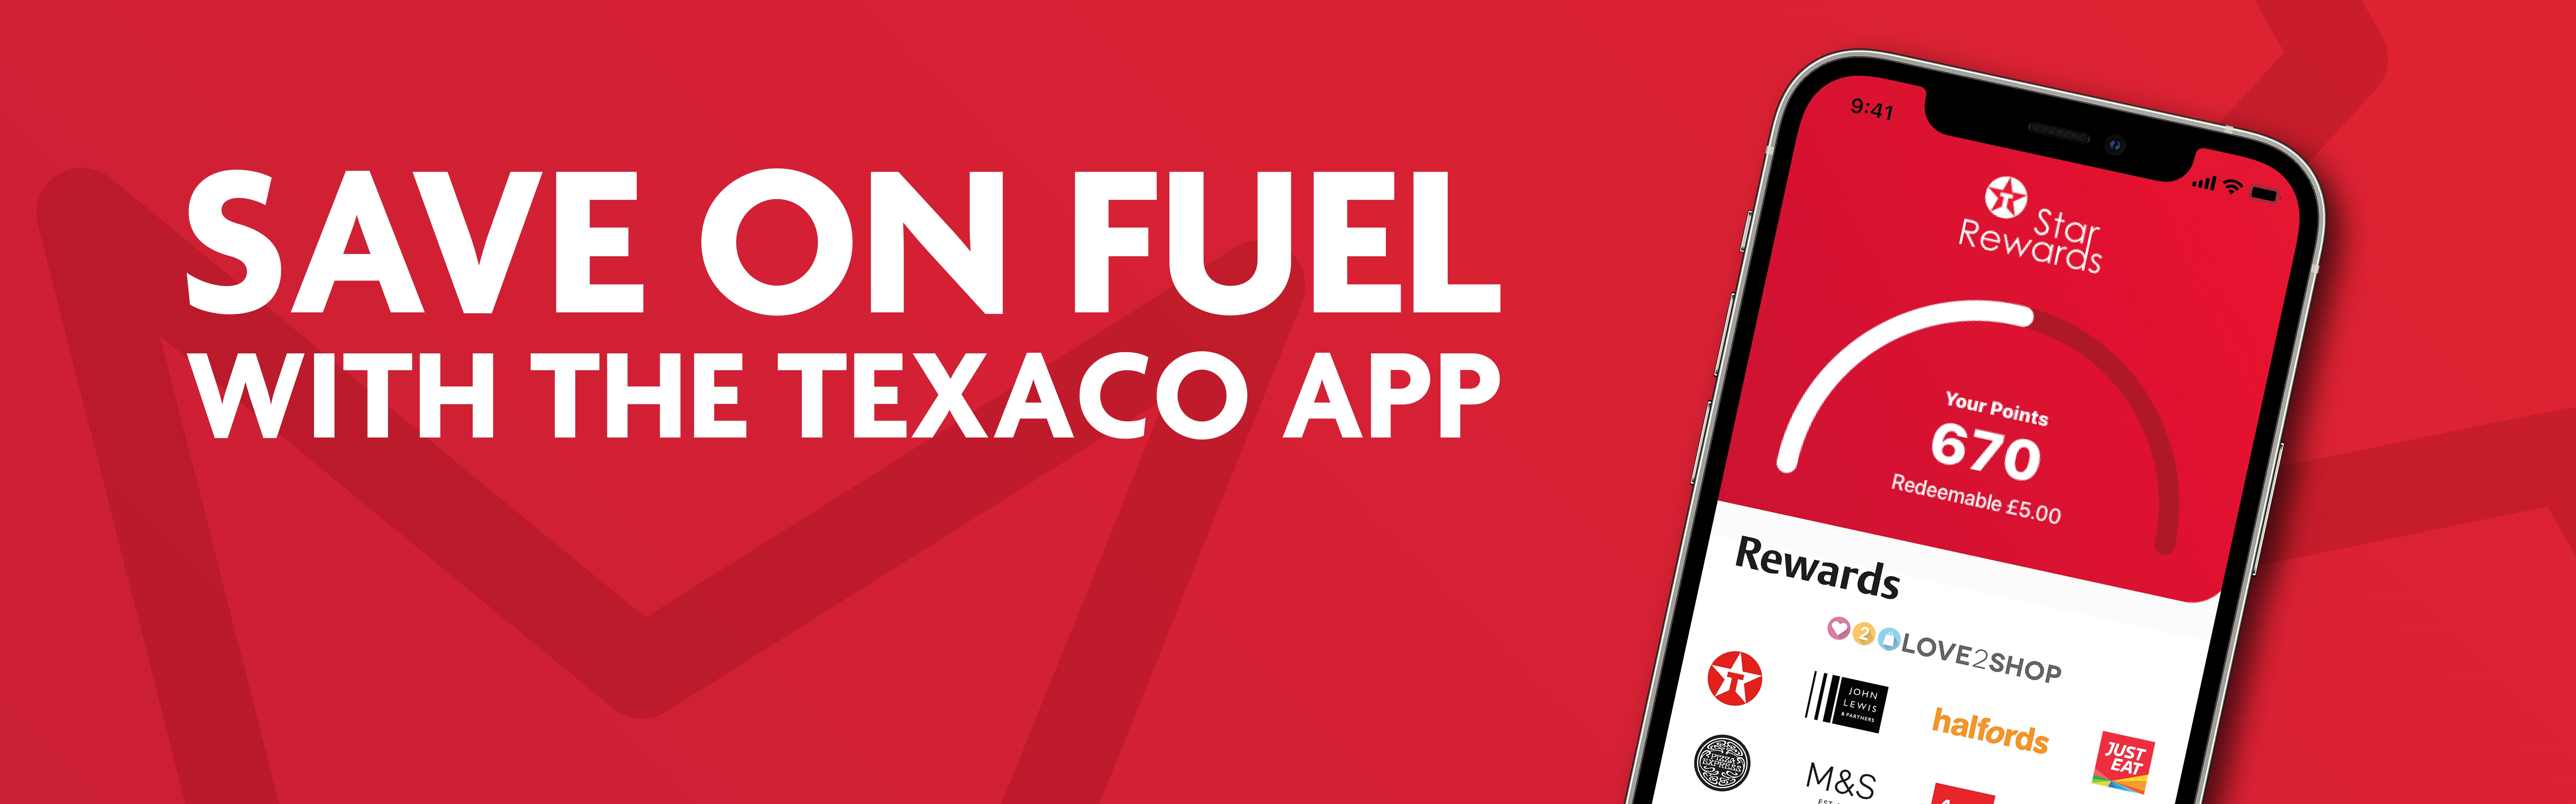 Save on fuel with the Texaco app. 200 points when you download and register*